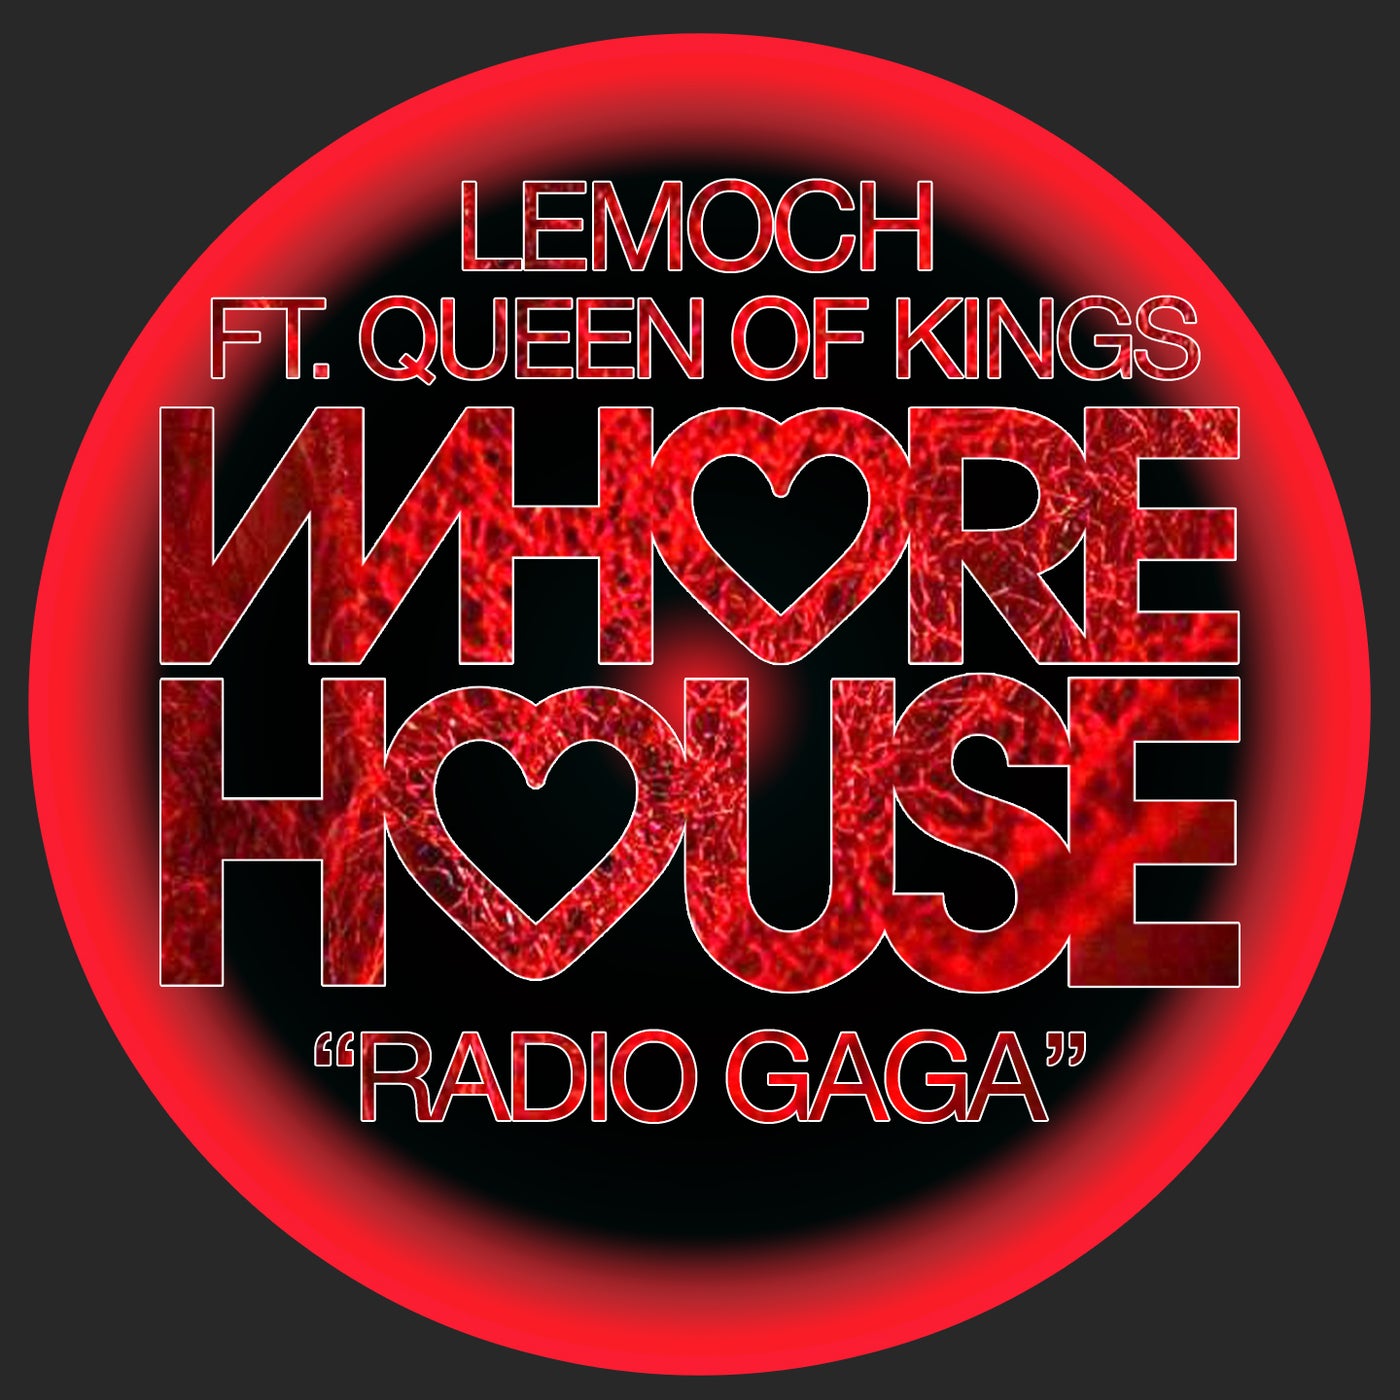 Radio GaGa Featuring Queen Of Kings from Whore House on Beatport